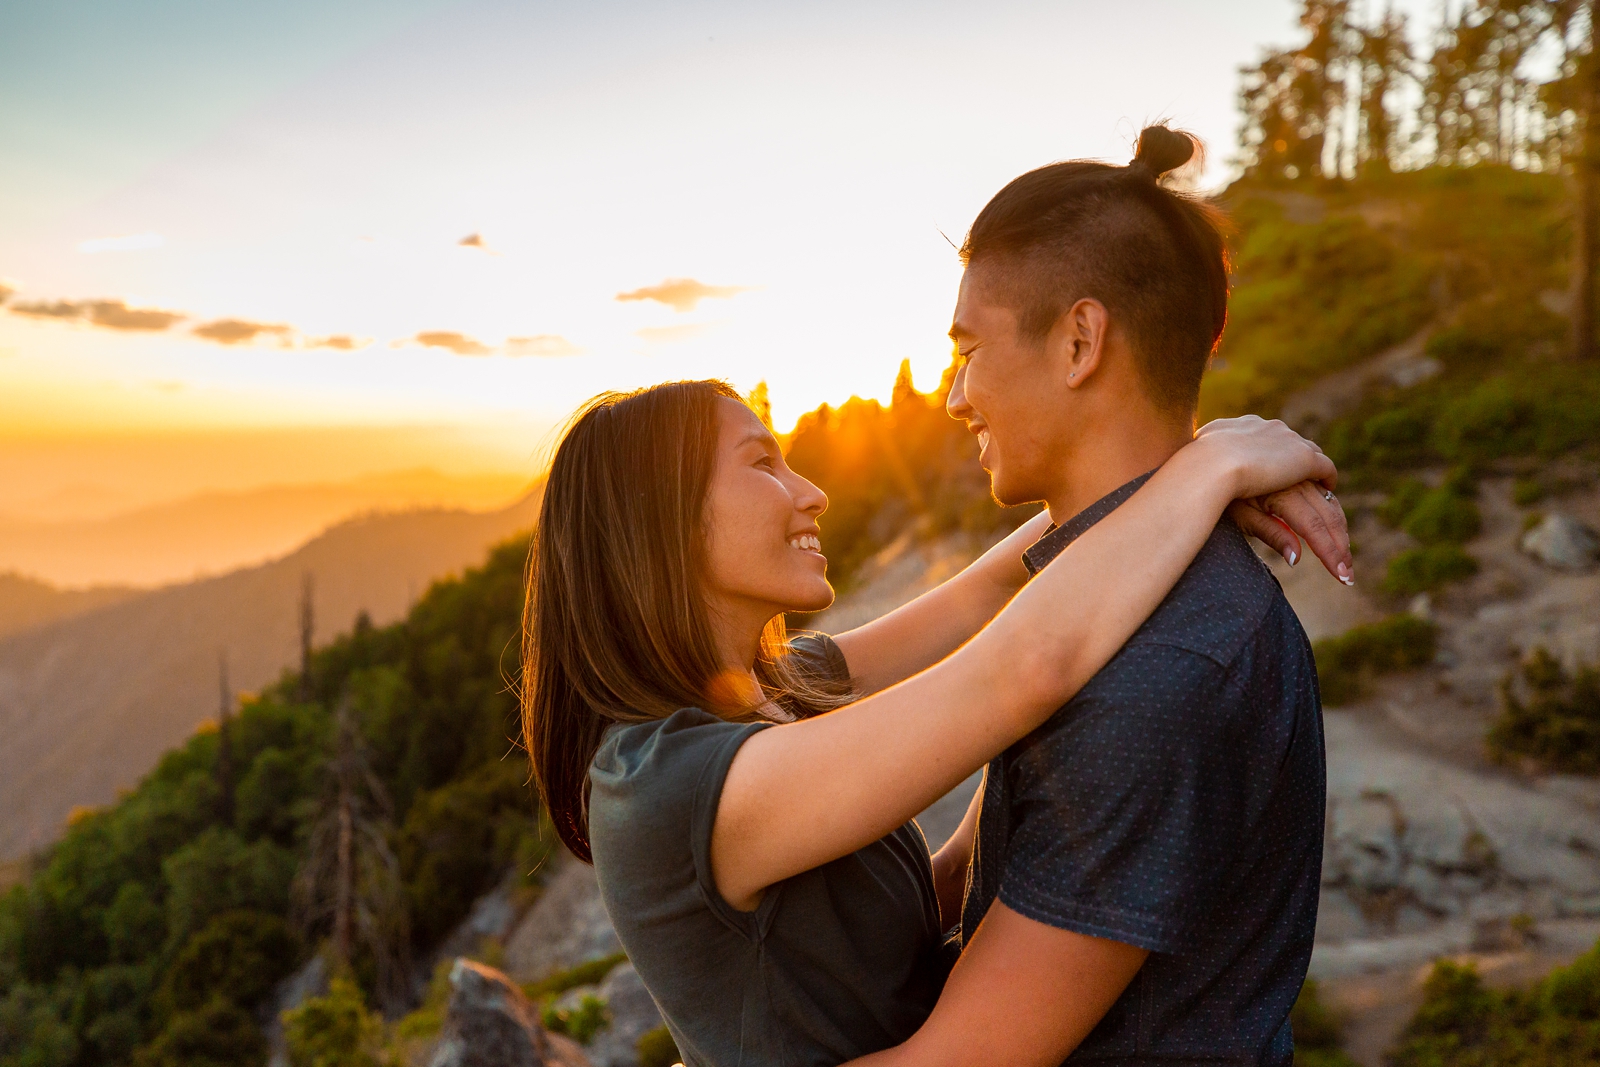 This couple got engaged at sunset in Sequoia CA.